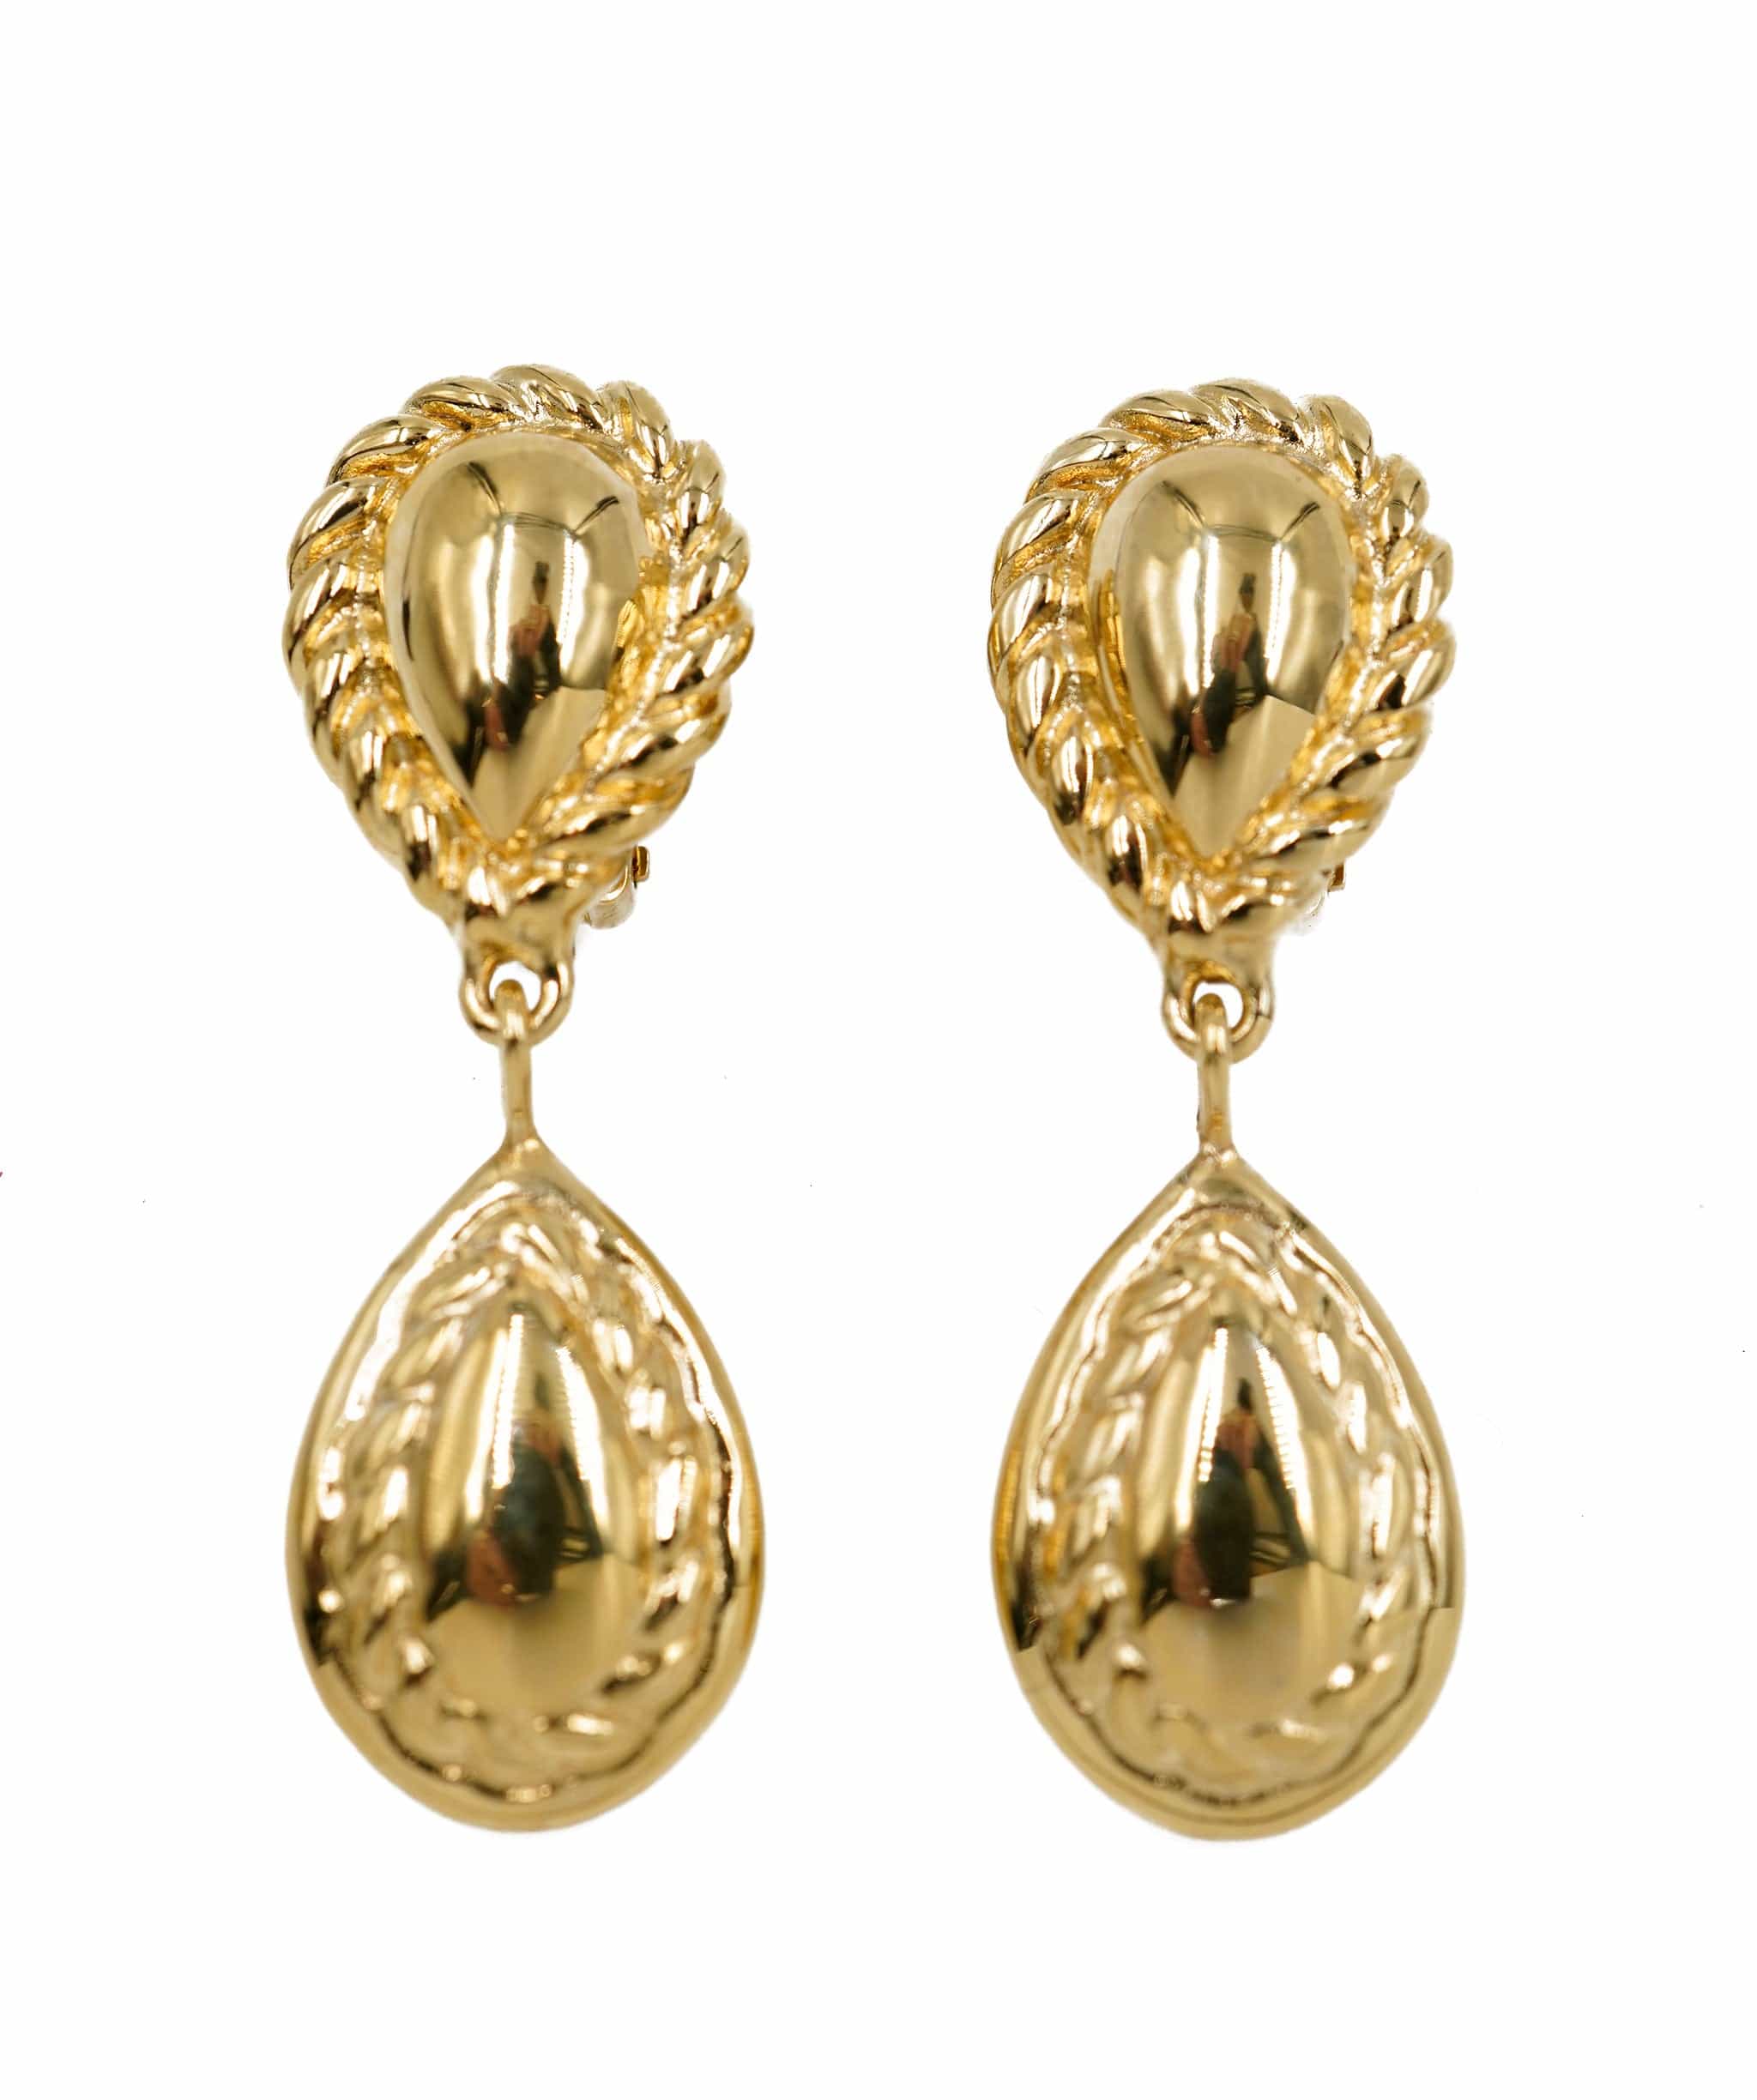 Givenchy Givenchy gold dangling teardrop clips, with tag AEL1096